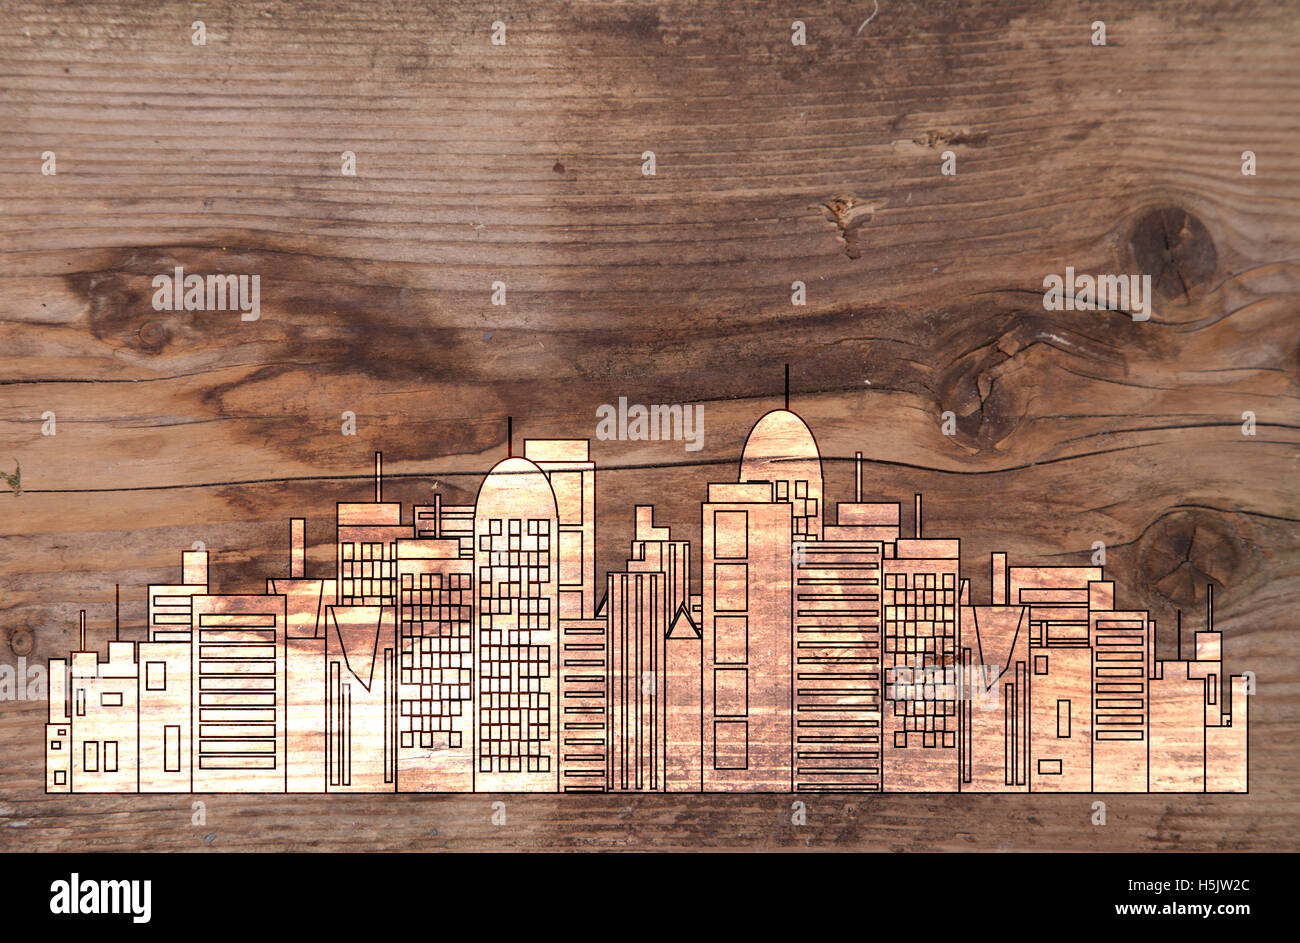 Office skyline on brown wooden background Stock Photo